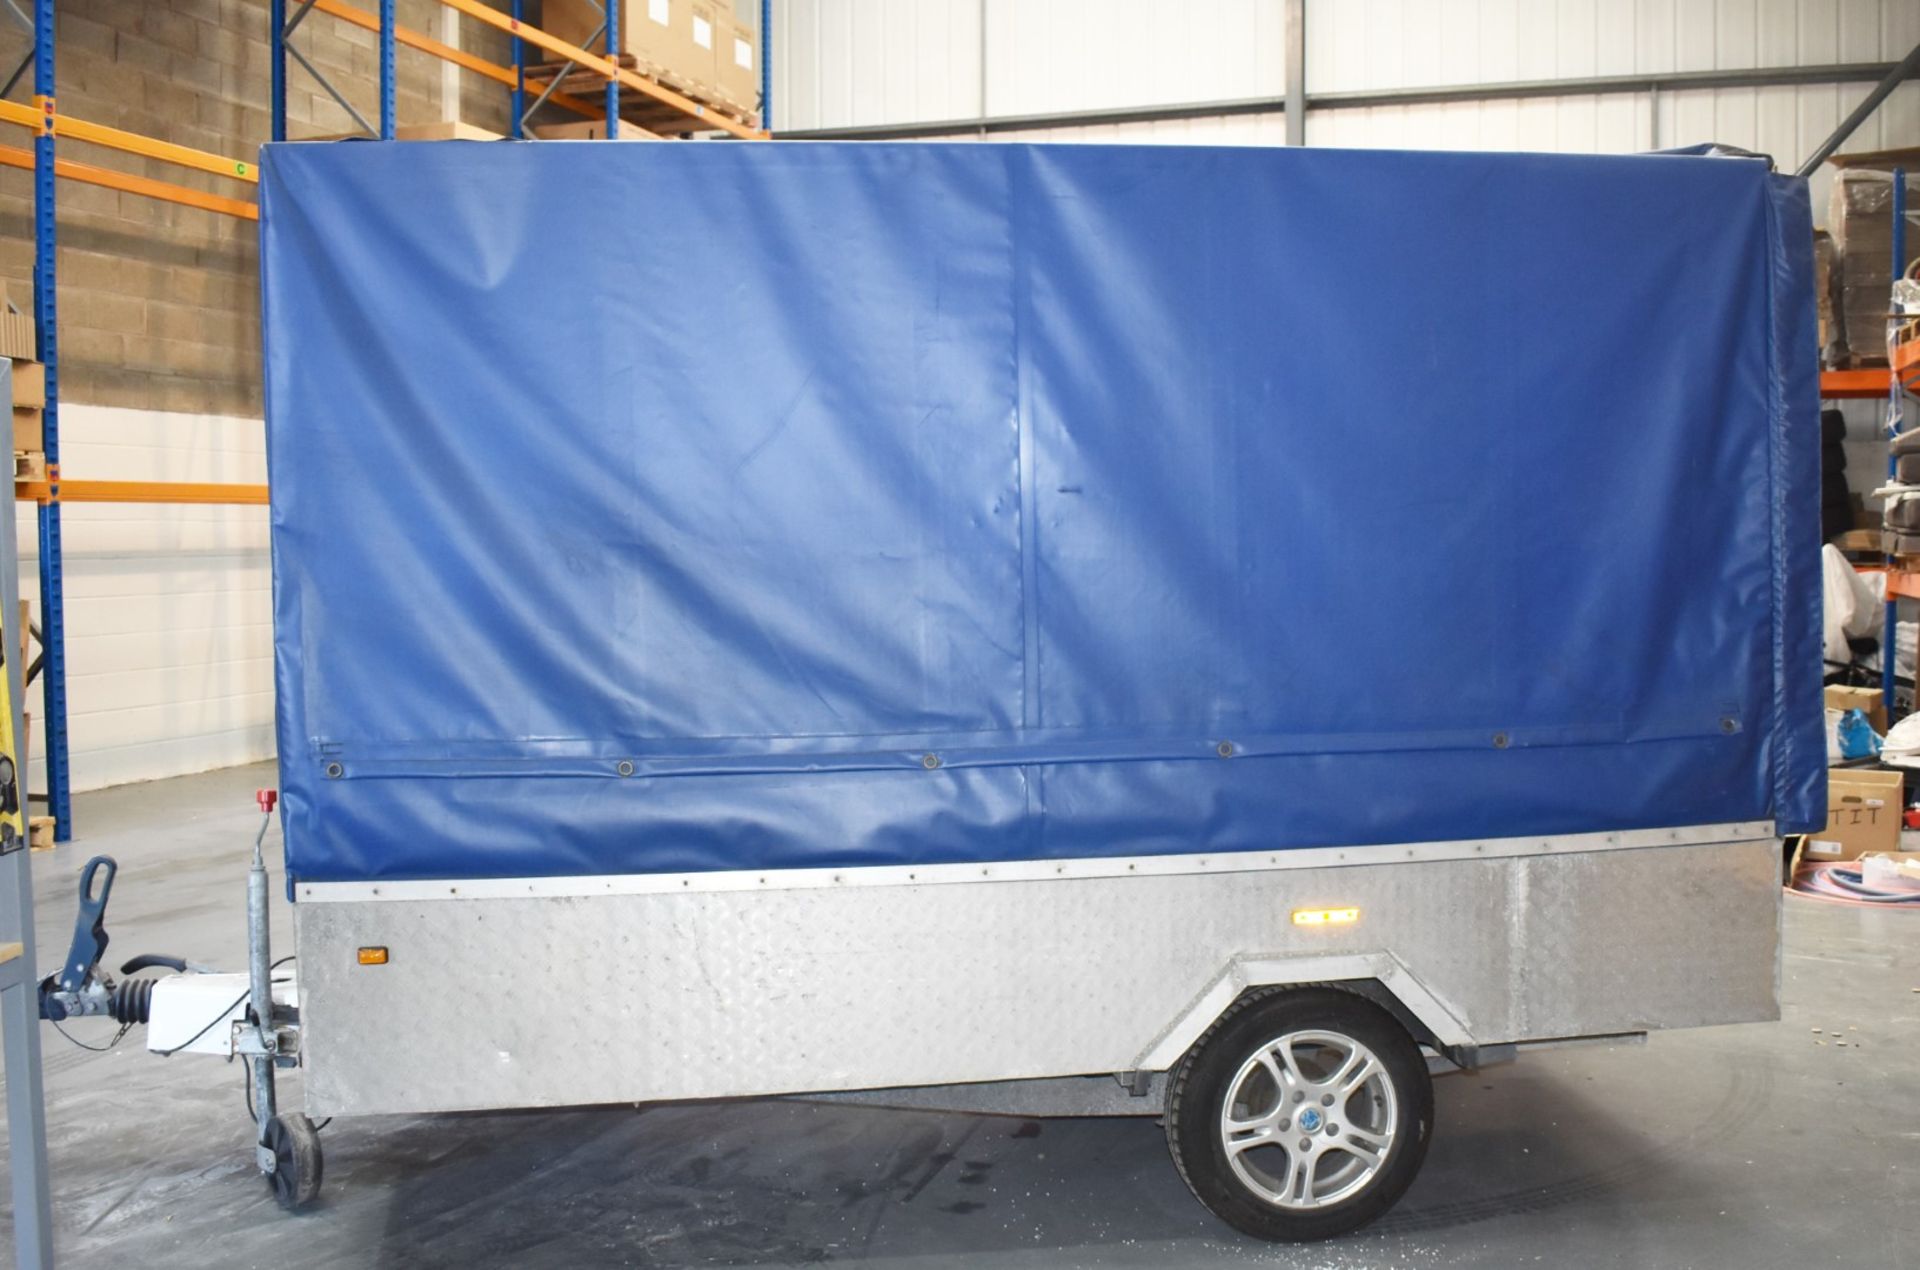 1 x Customised 10x6ft Tow Trailer With Aluminium Frame Enclosure and Heavy Duty Cover, BP WS3000 - Image 6 of 13